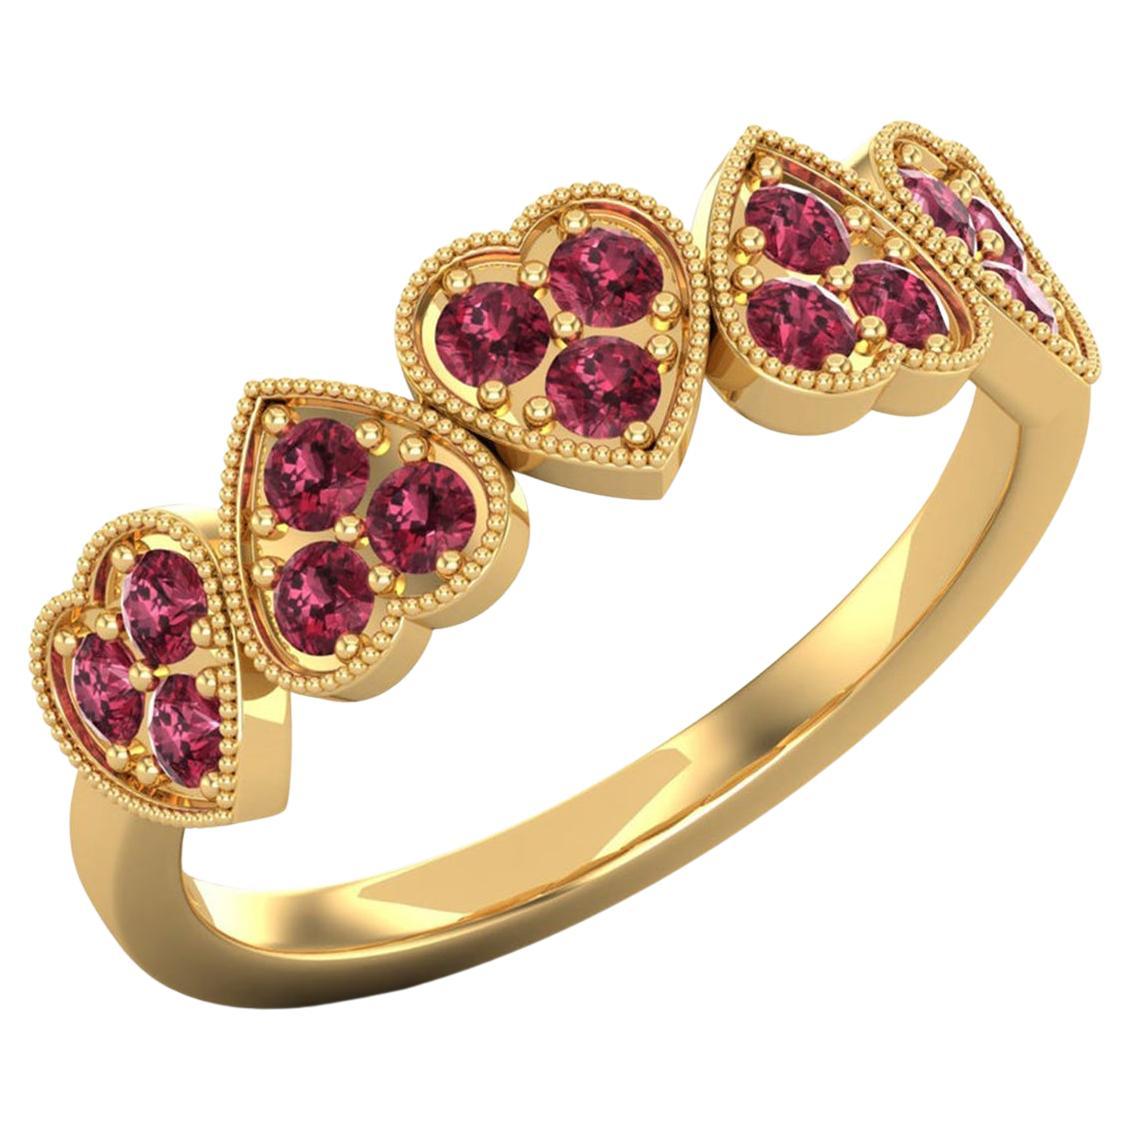 14 karat Gold Round Red Garnet Ring / Gold Engagement Ring / Heart Ring for Her For Sale